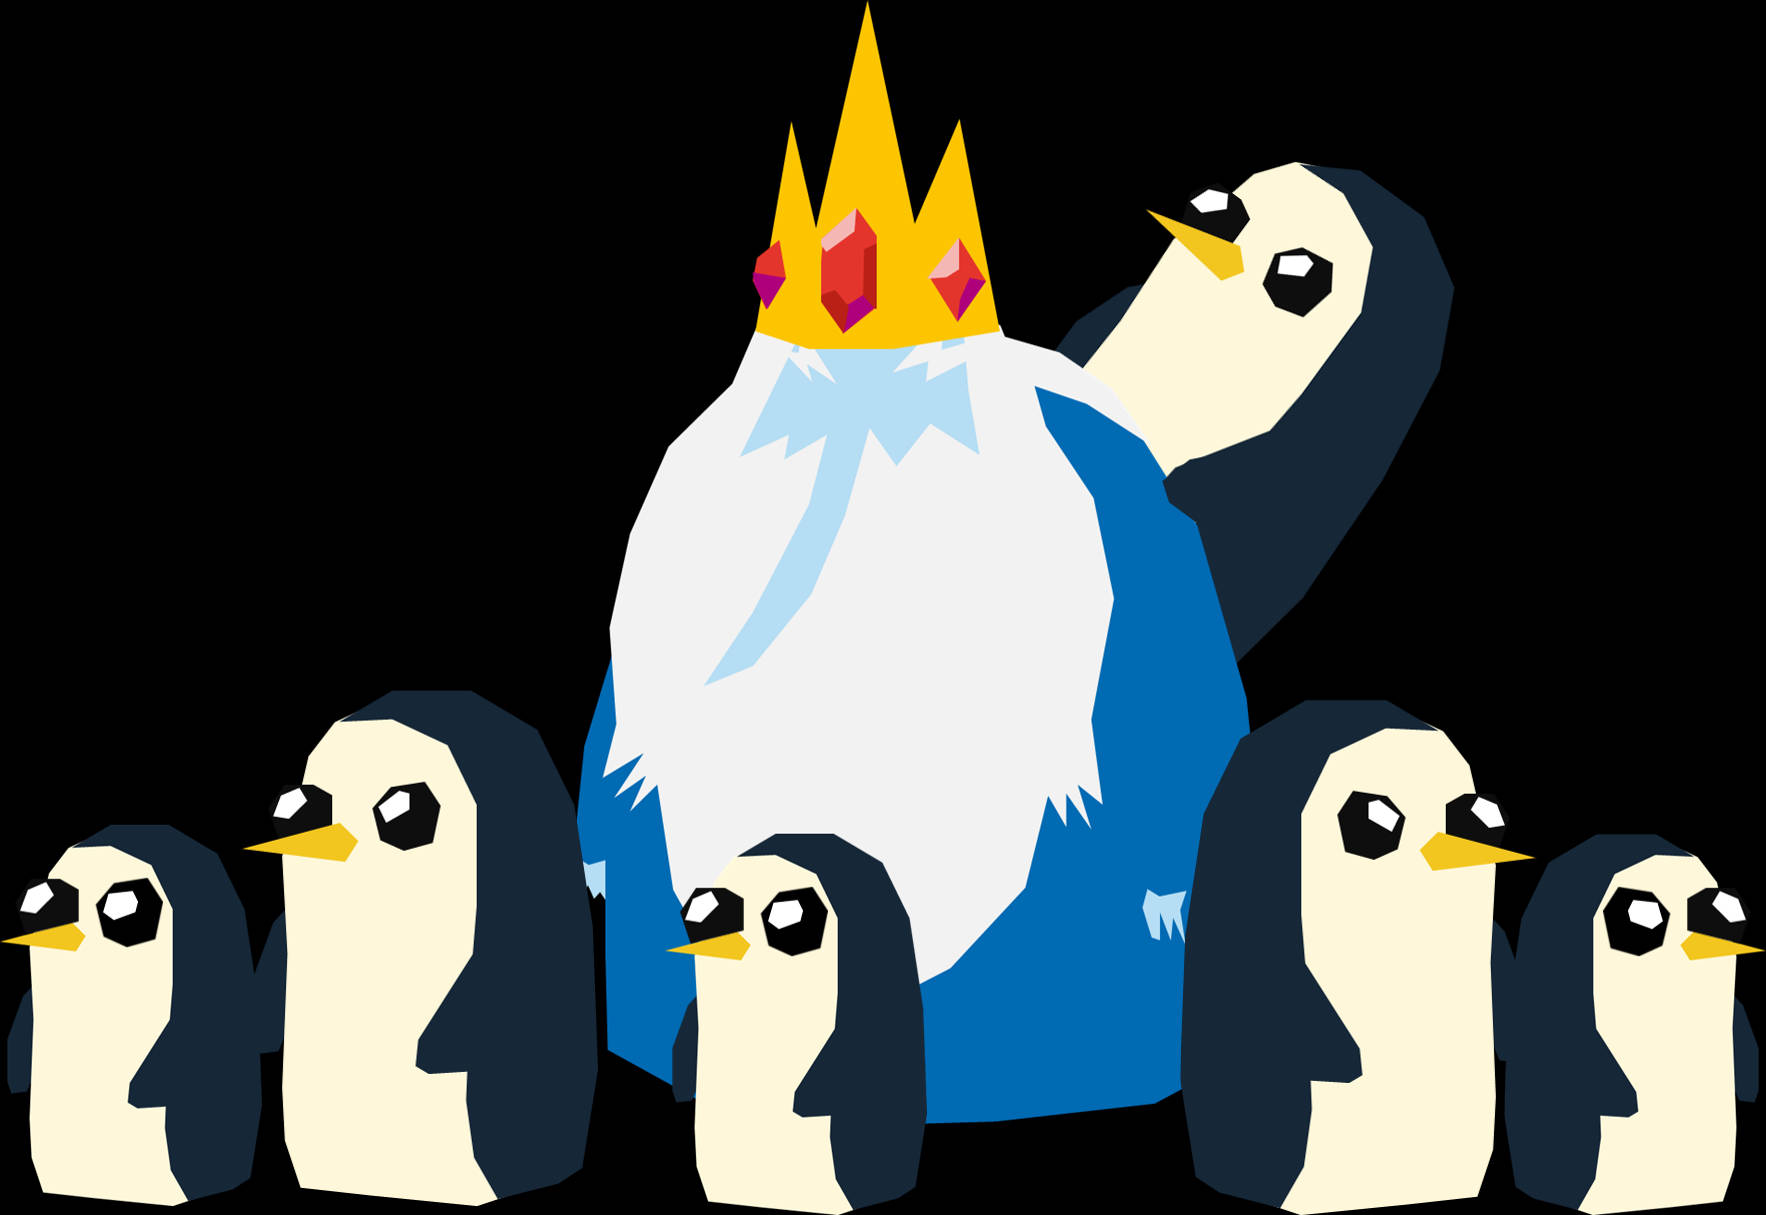 Caption: Gunter - The Adorable Trouble-maker From Adventure Time